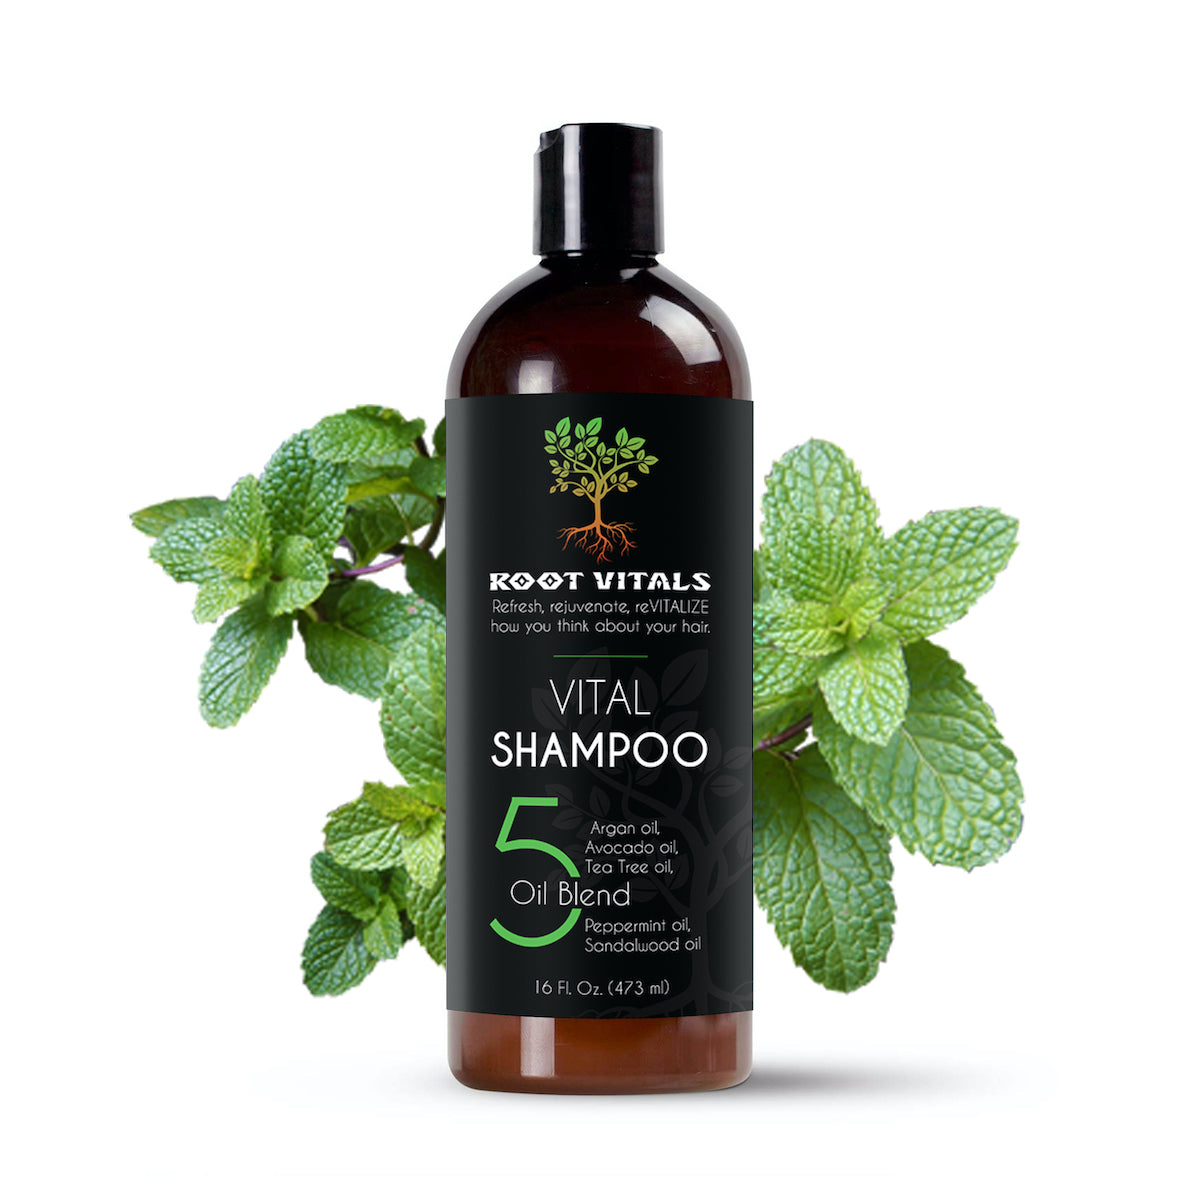 Peppermint scented natural hair growth shampoo